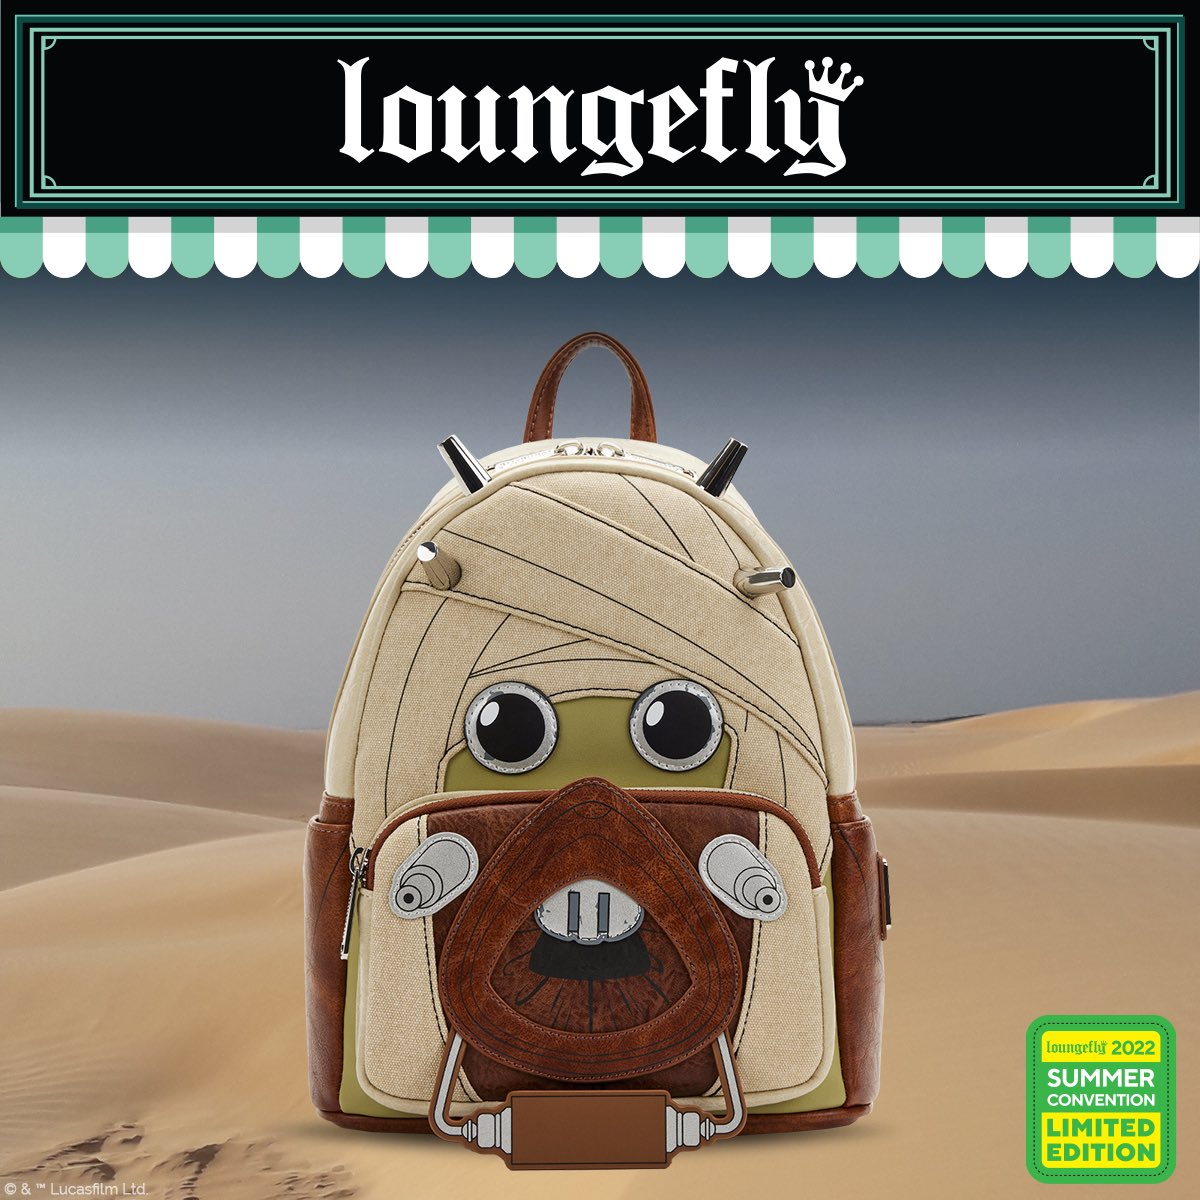 Loungefly at Comic Con 2022 - Exclusives and Reveals